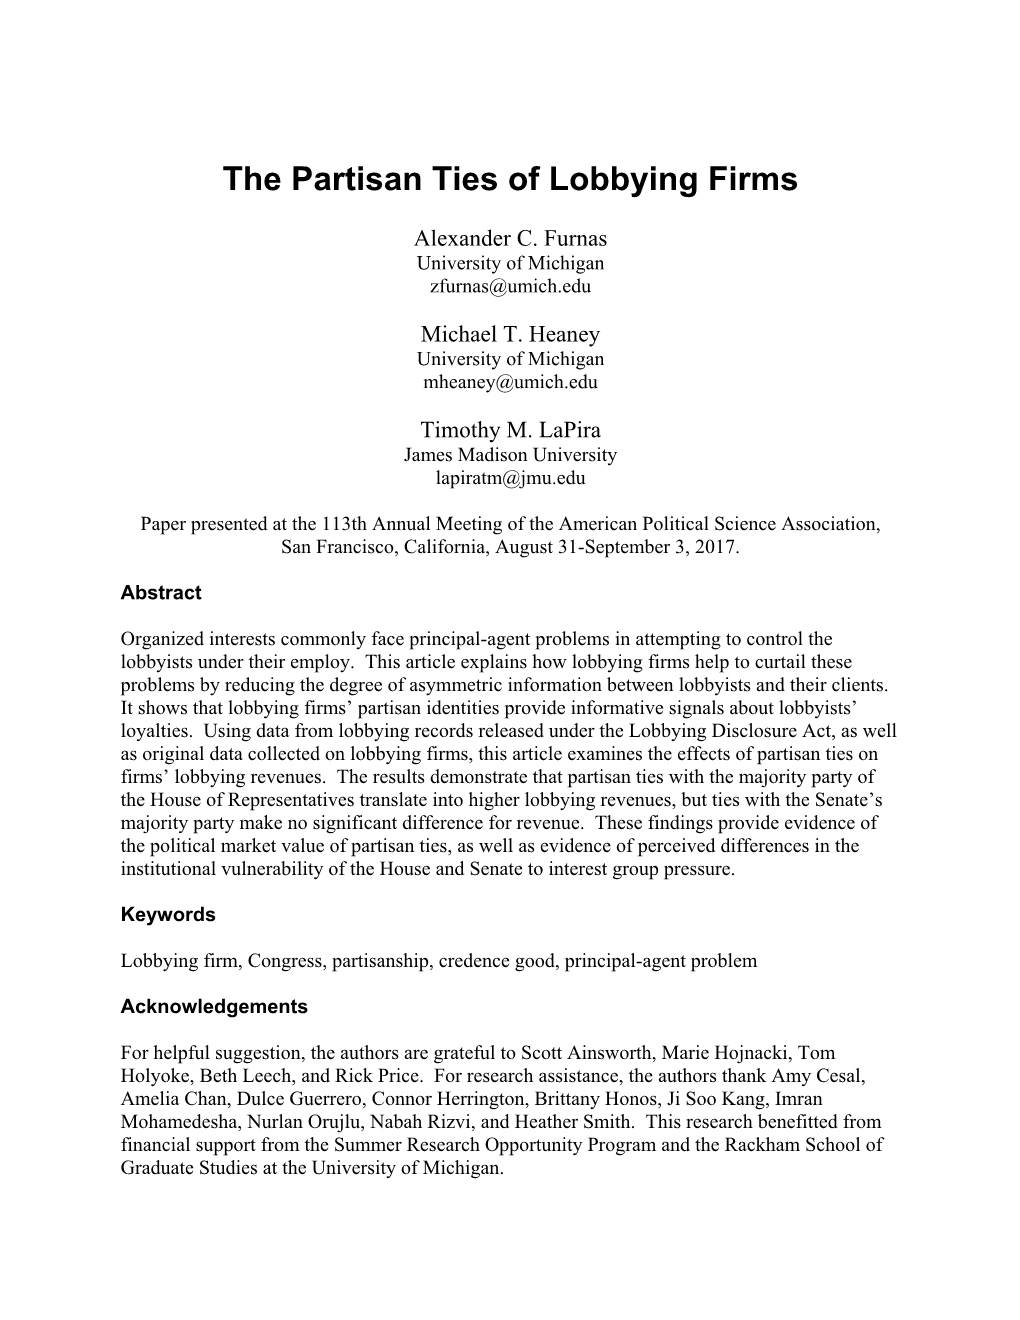 The Partisan Ties of Lobbying Firms